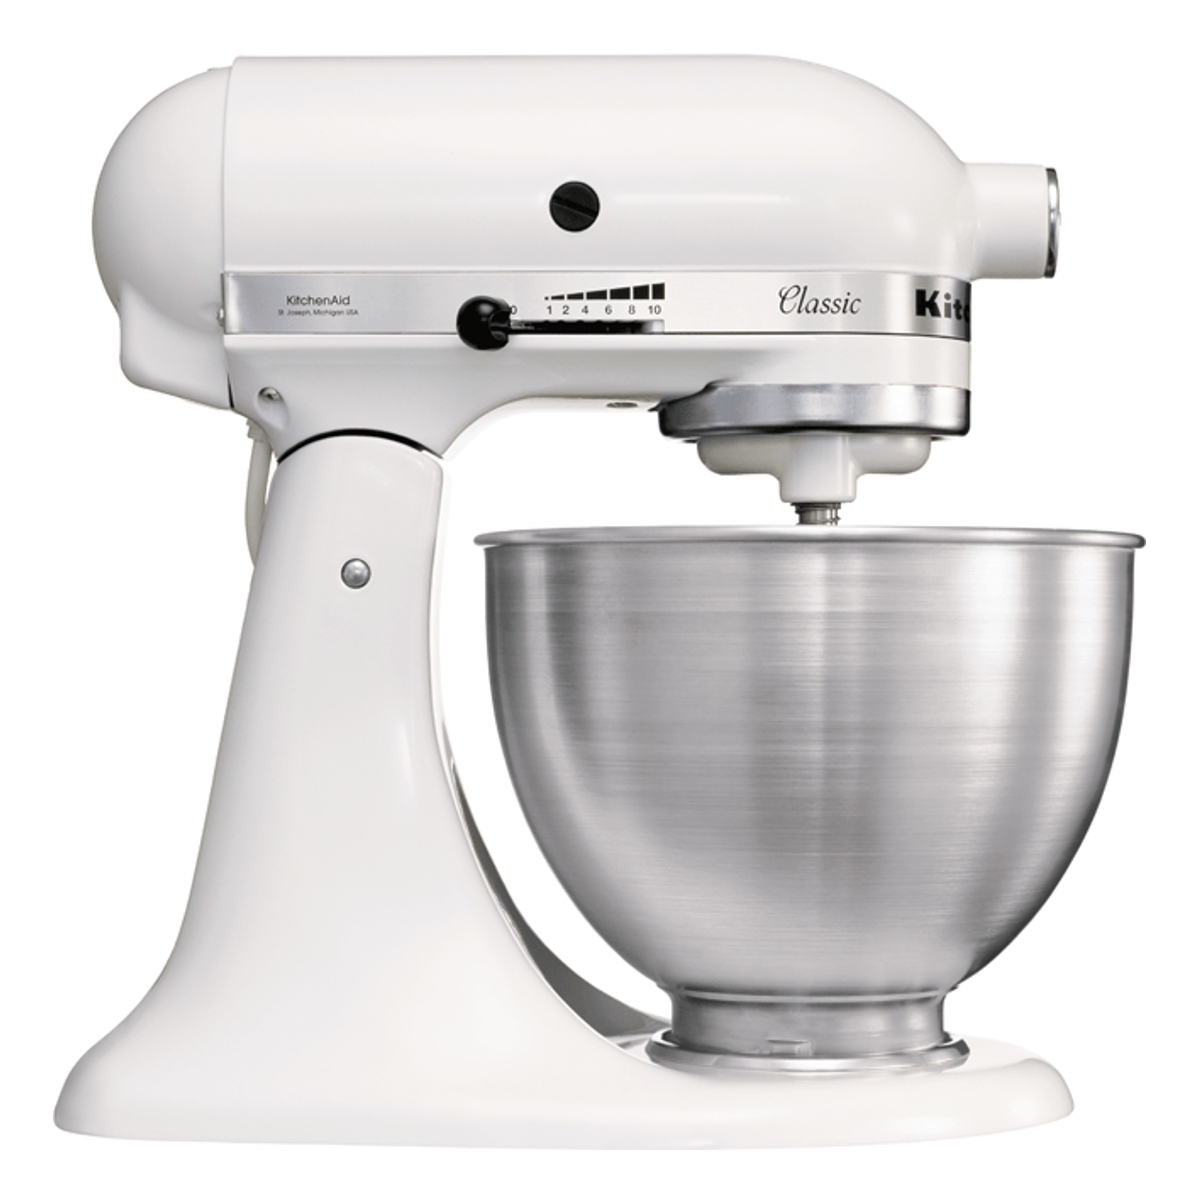 Kitchenaid 5K45SSBWH Classic Stand Mixer with 4.3L Capacity in White